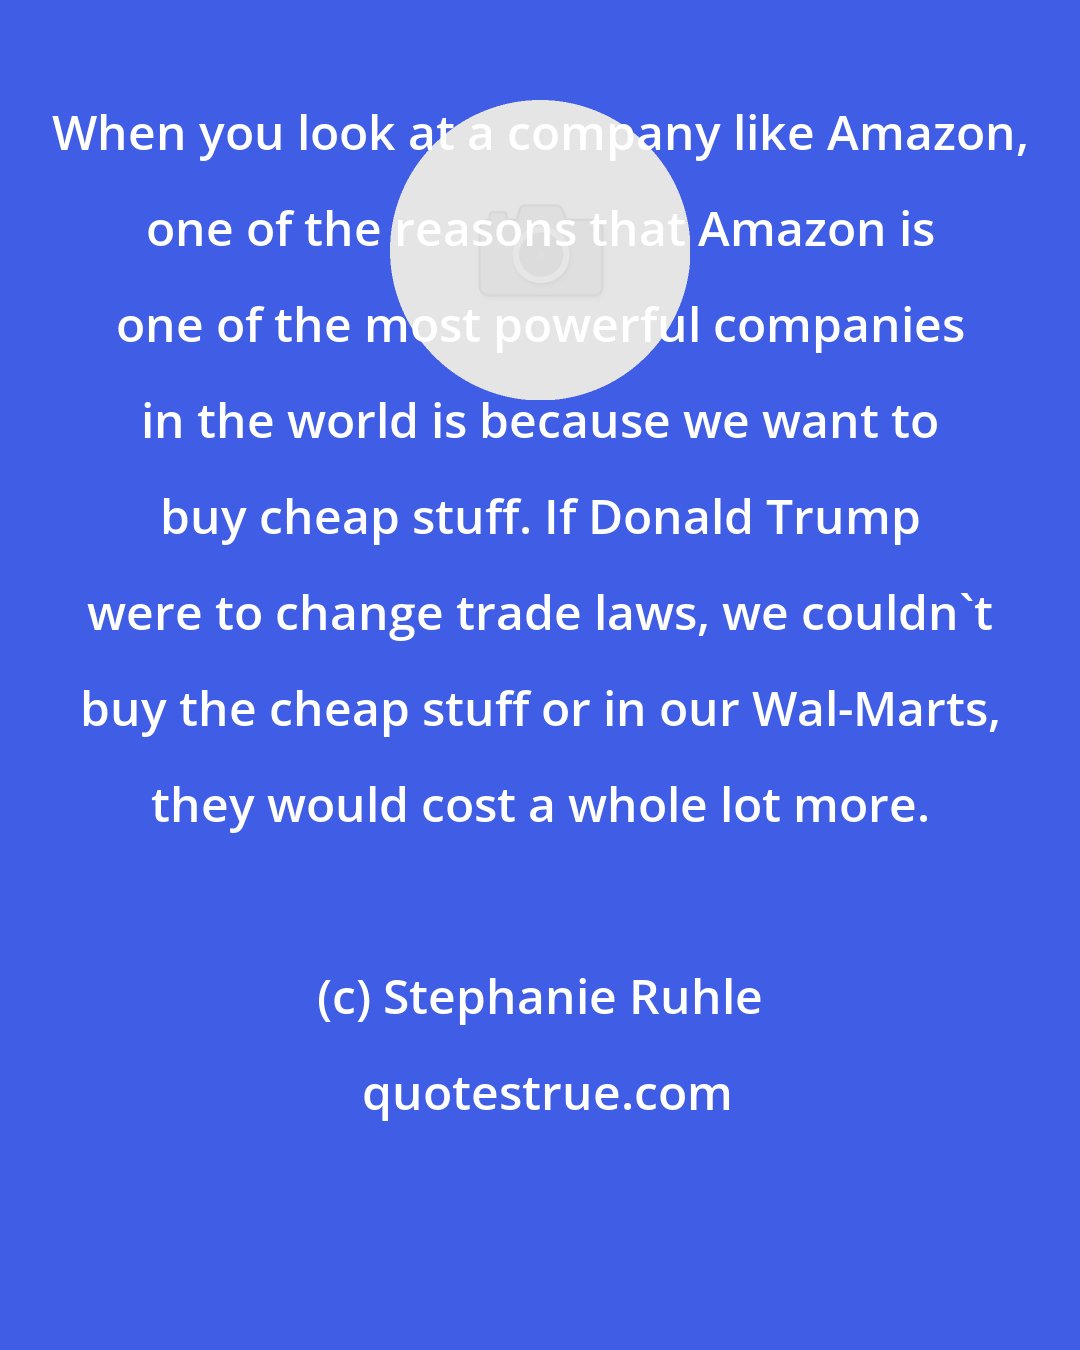 Stephanie Ruhle: When you look at a company like Amazon, one of the reasons that Amazon is one of the most powerful companies in the world is because we want to buy cheap stuff. If Donald Trump were to change trade laws, we couldn't buy the cheap stuff or in our Wal-Marts, they would cost a whole lot more.